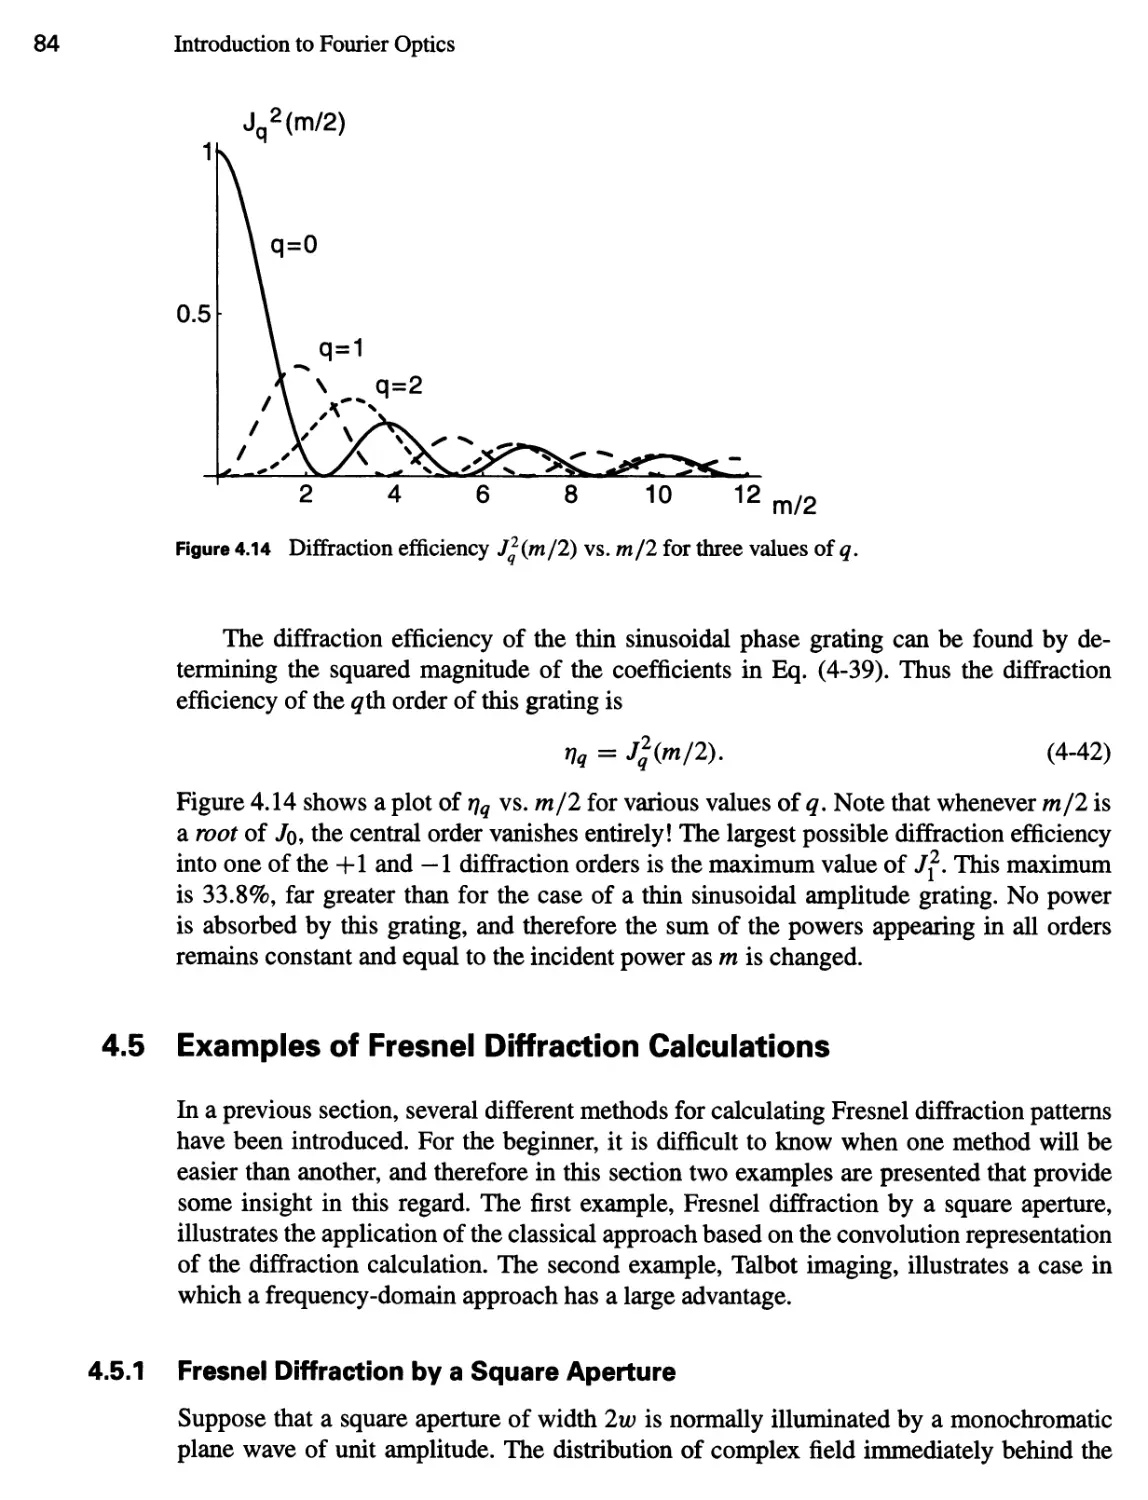 4.5 Examples of Fresnel Diffraction Calculations 84